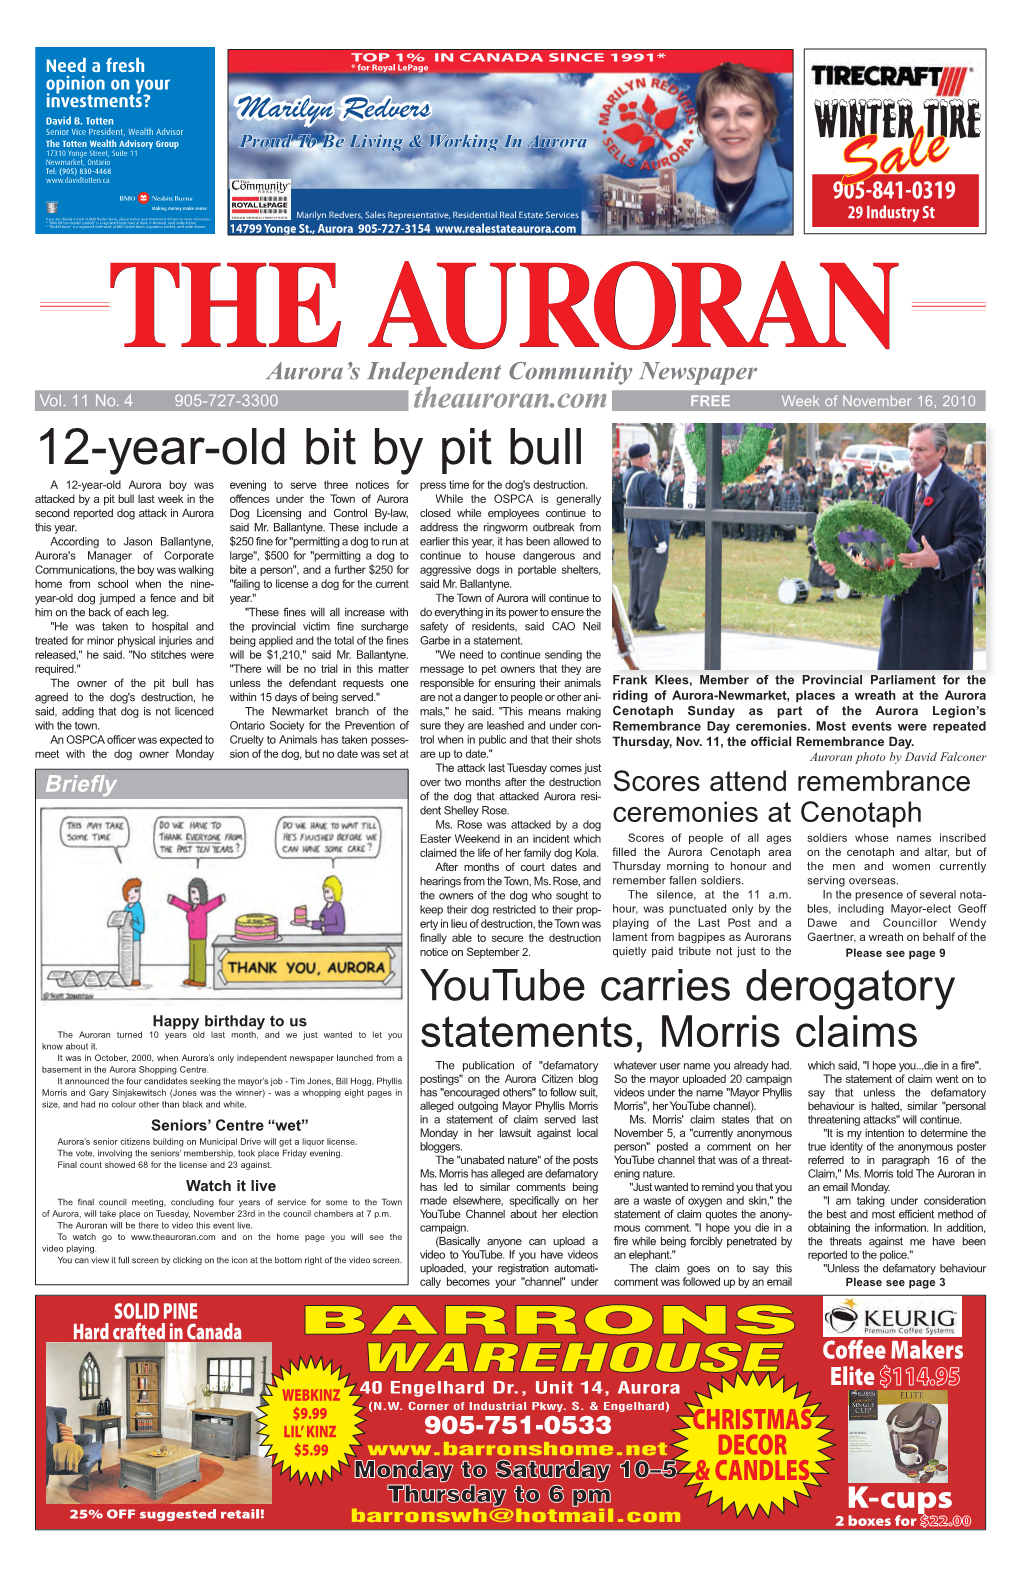 12-Year-Old Bit by Pit Bull a 12-Year-Old Aurora Boy Was Evening to Serve Three Notices for Press Time for the Dog's Destruction